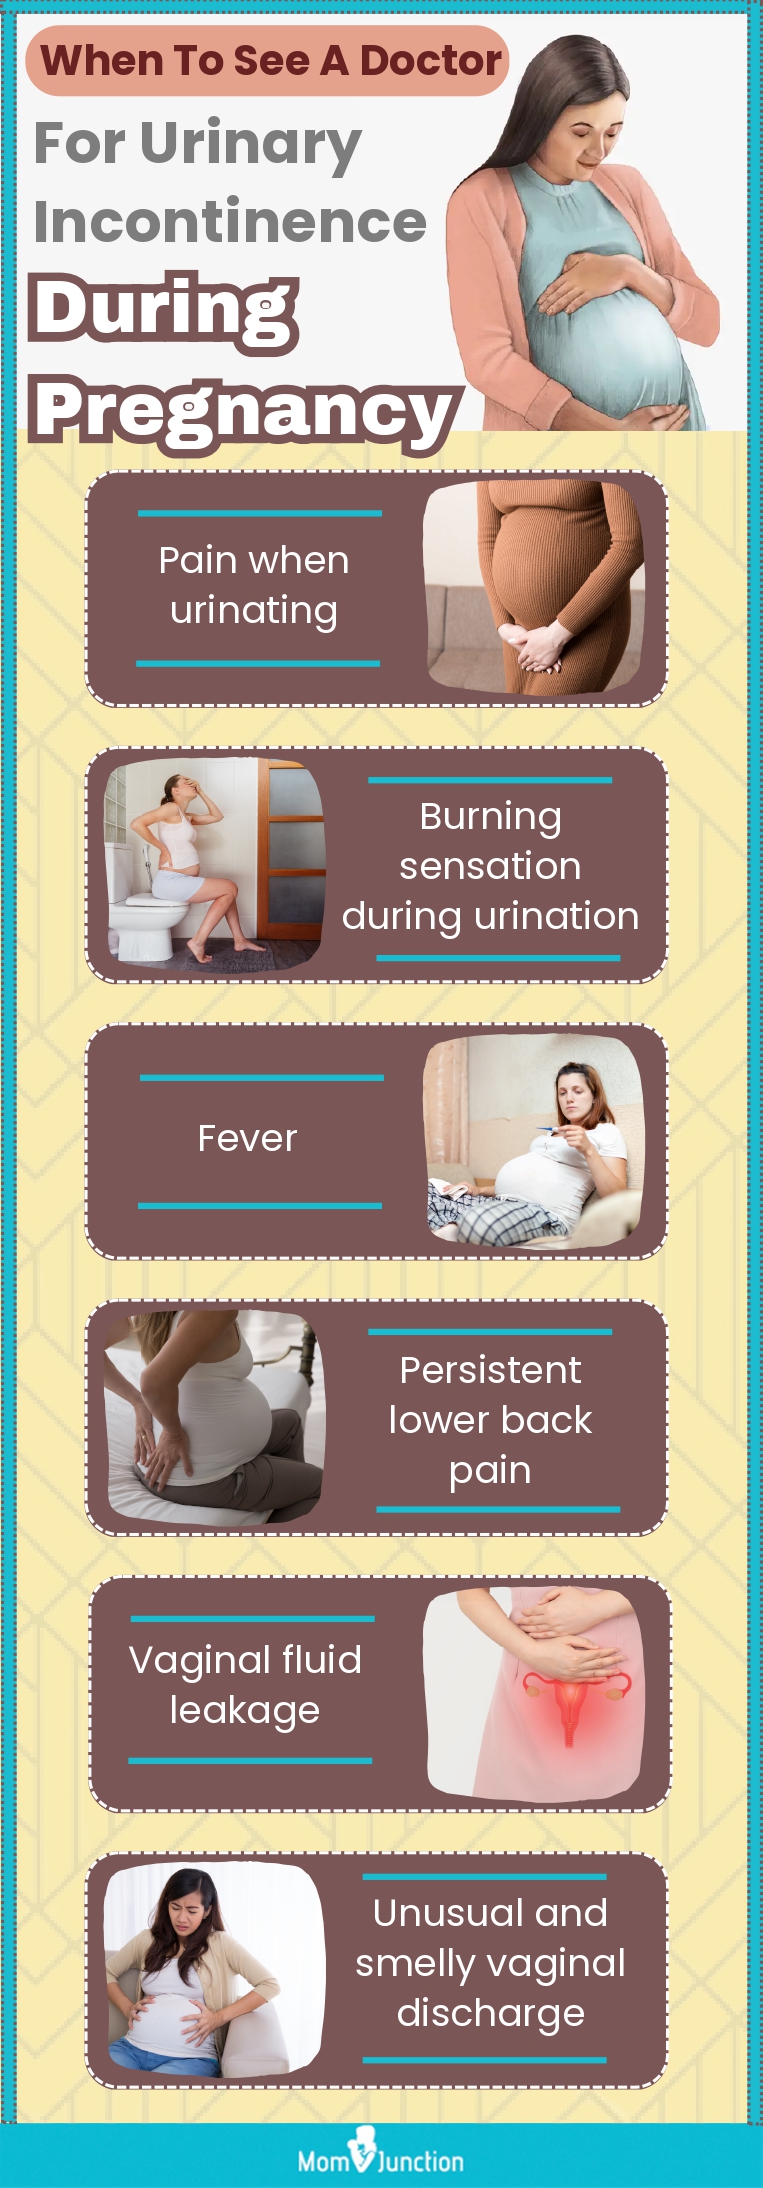 when to see a doctor for urinary incontinence during pregnancy (infographic)